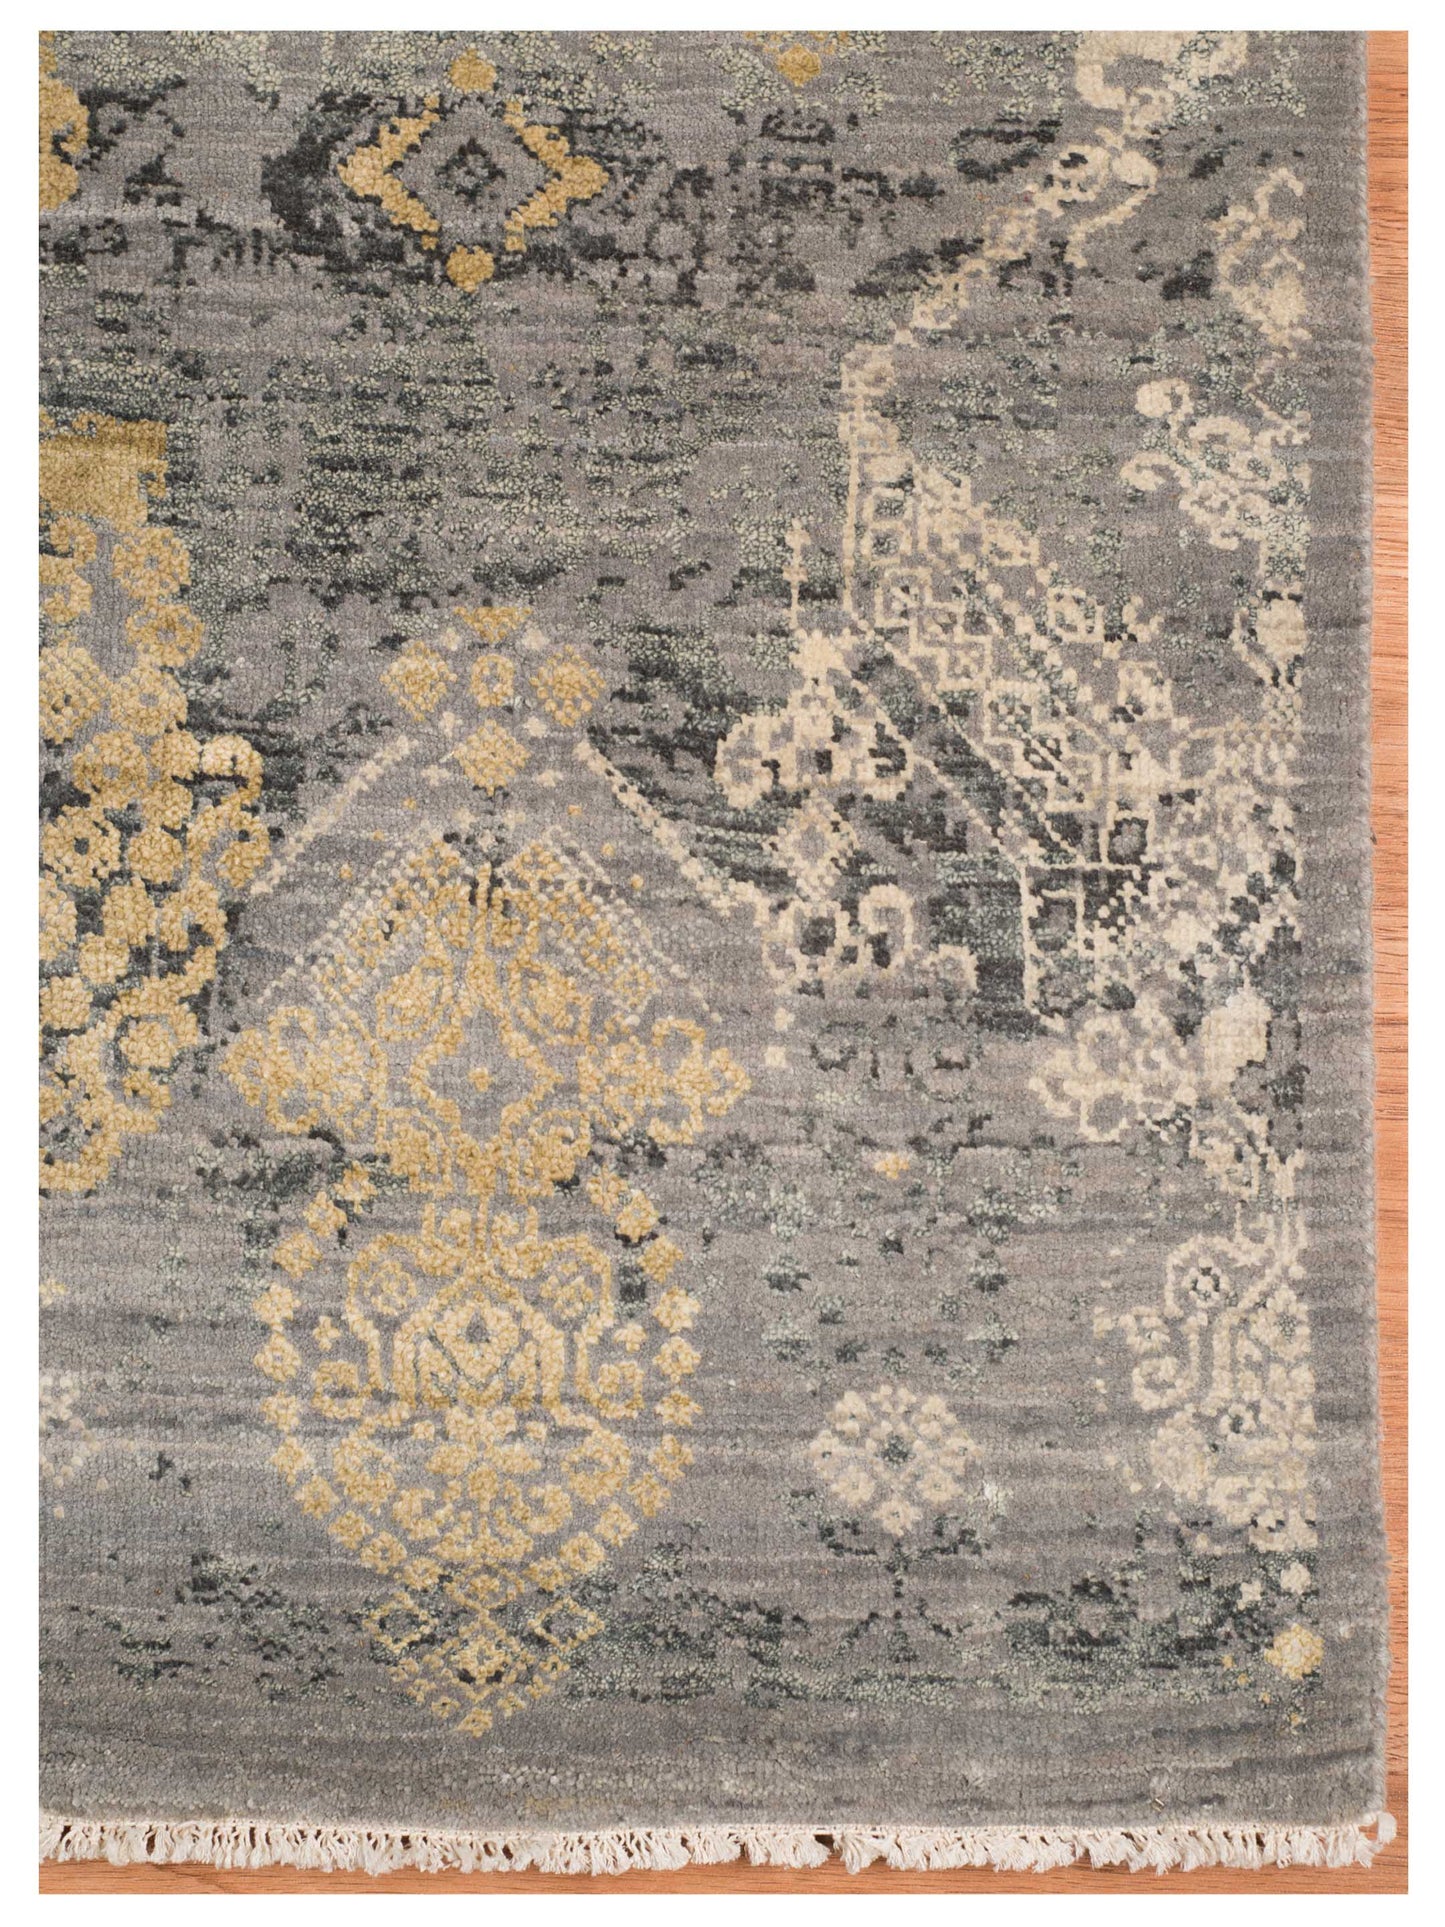 Limited PARKES PA-565 SILVER SAND Transitional Knotted Rug